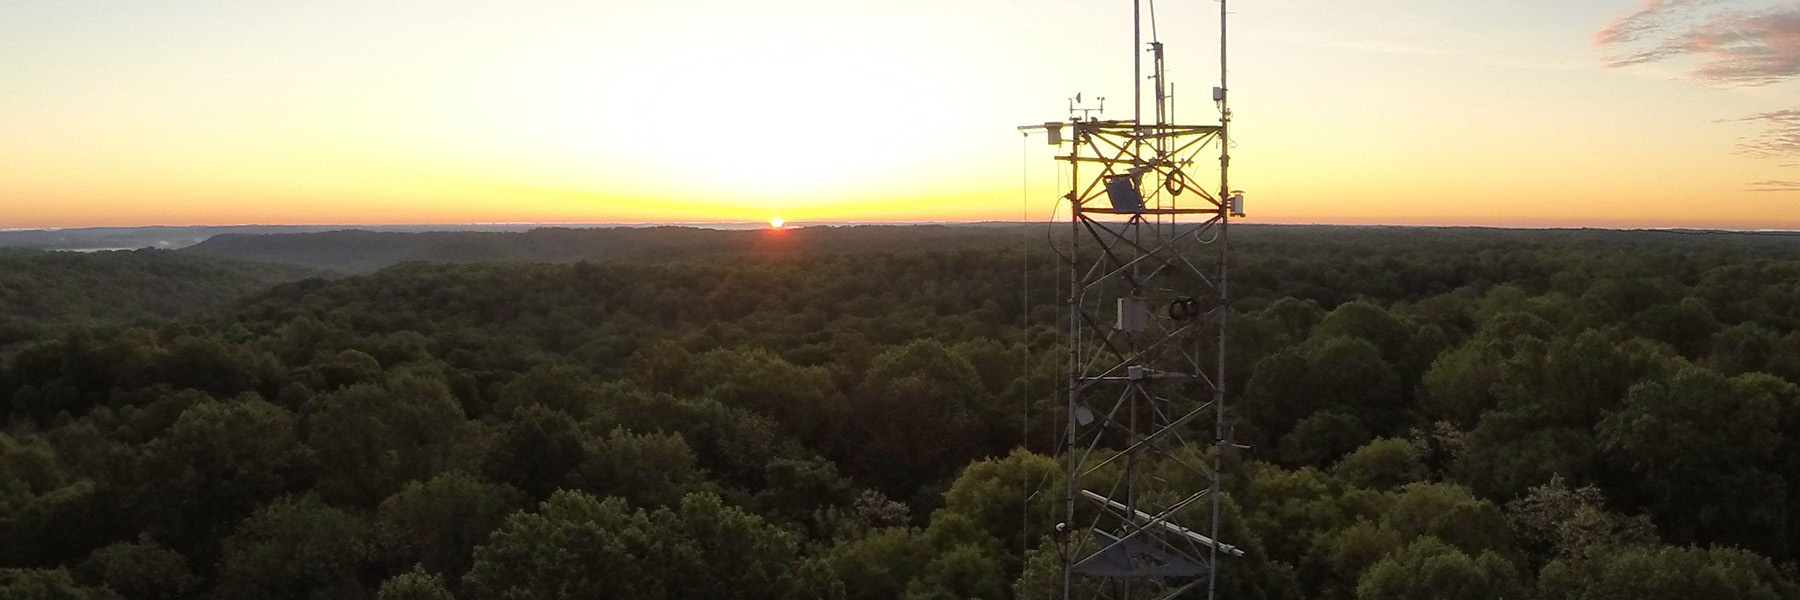 Sunset at the Ameriflux Tower property.